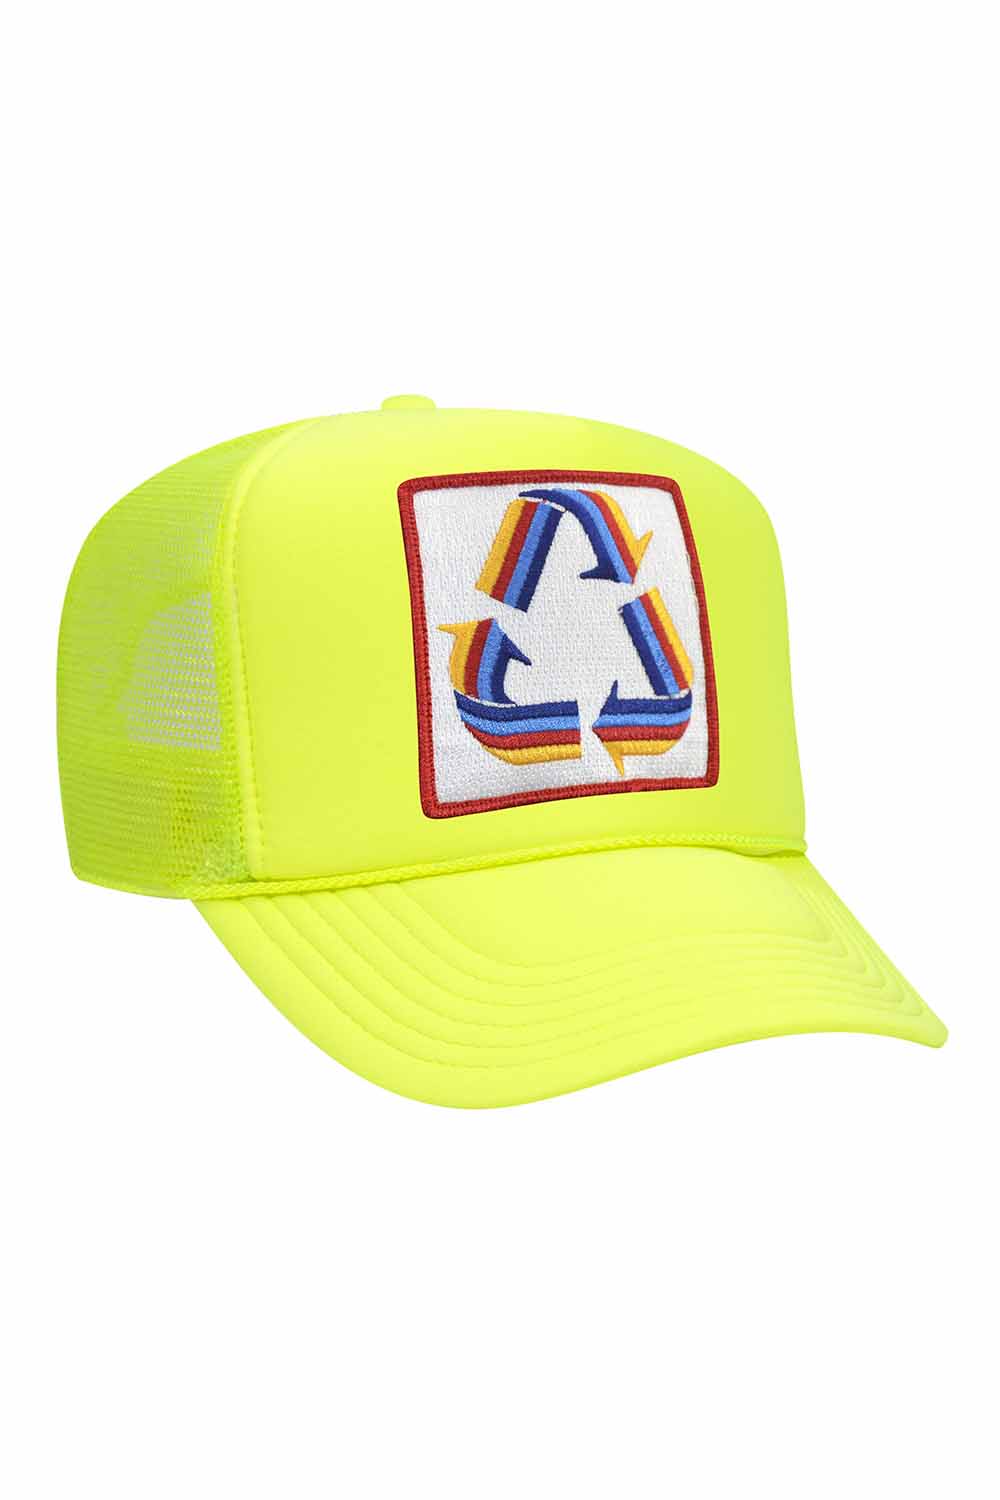 RECYCLE TRUCKER HAT HATS Aviator Nation OS NEON YELLOW 